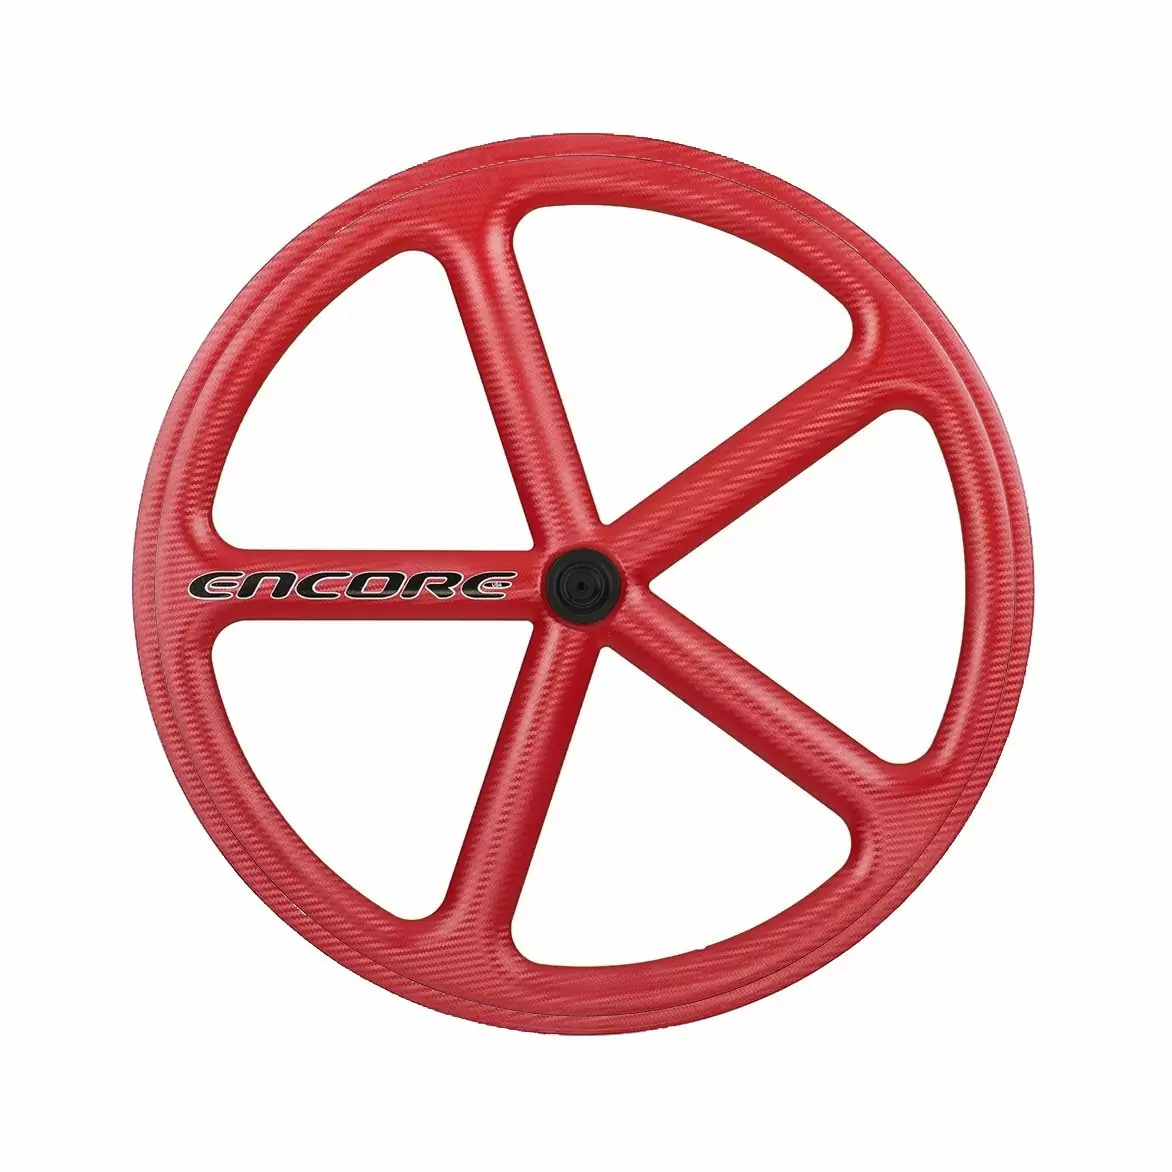 roue arrière 700c piste 5 rayons tissage carbone rouge nmsw - image